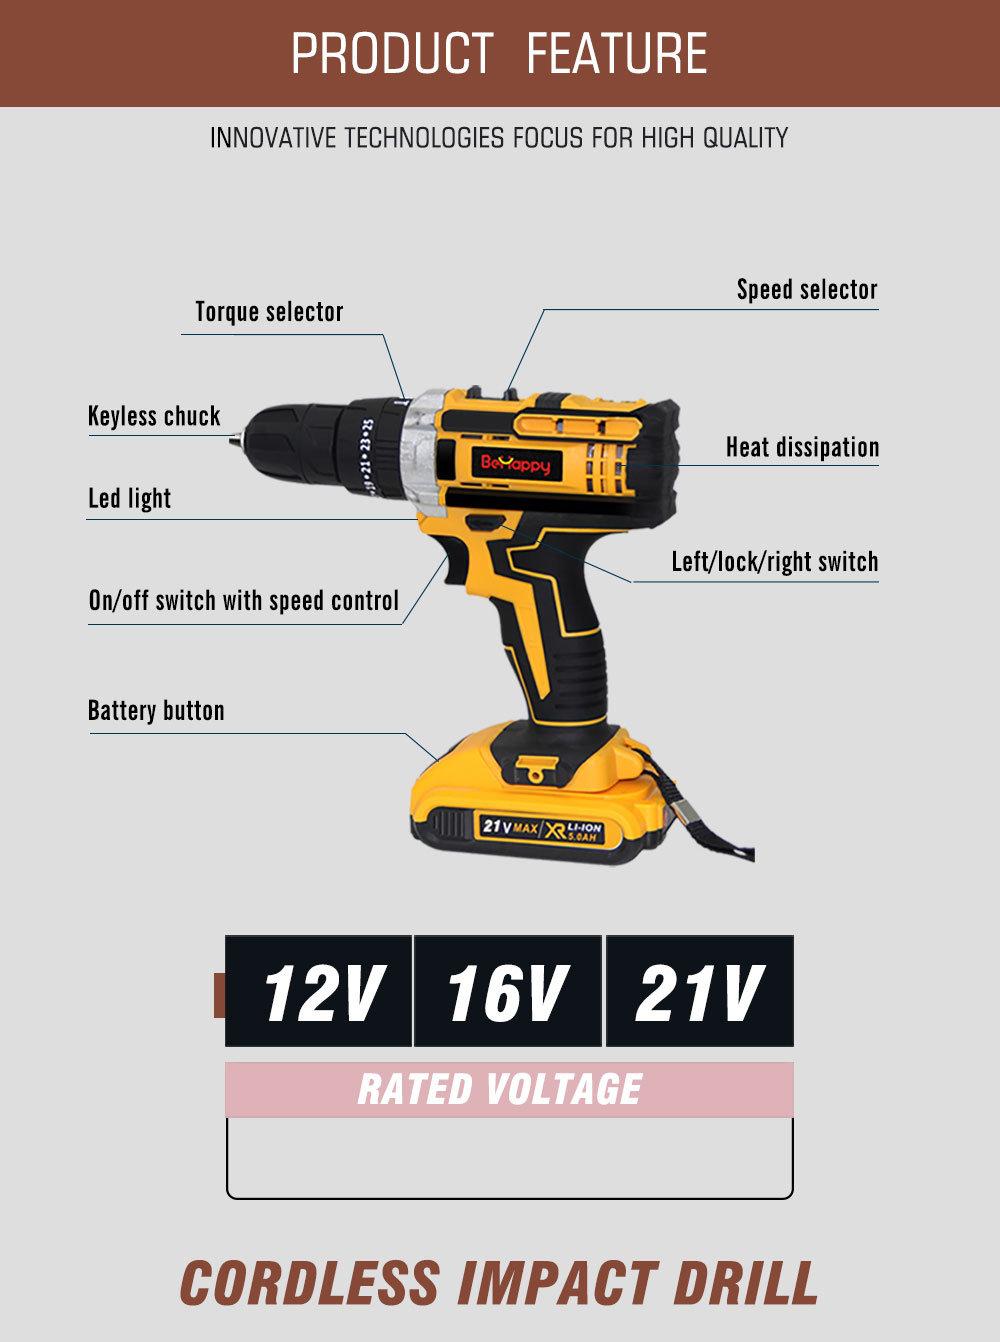 Behappy 21V Yellow Power Tool Cordless Hand Drill for Drilling Metal and Wood